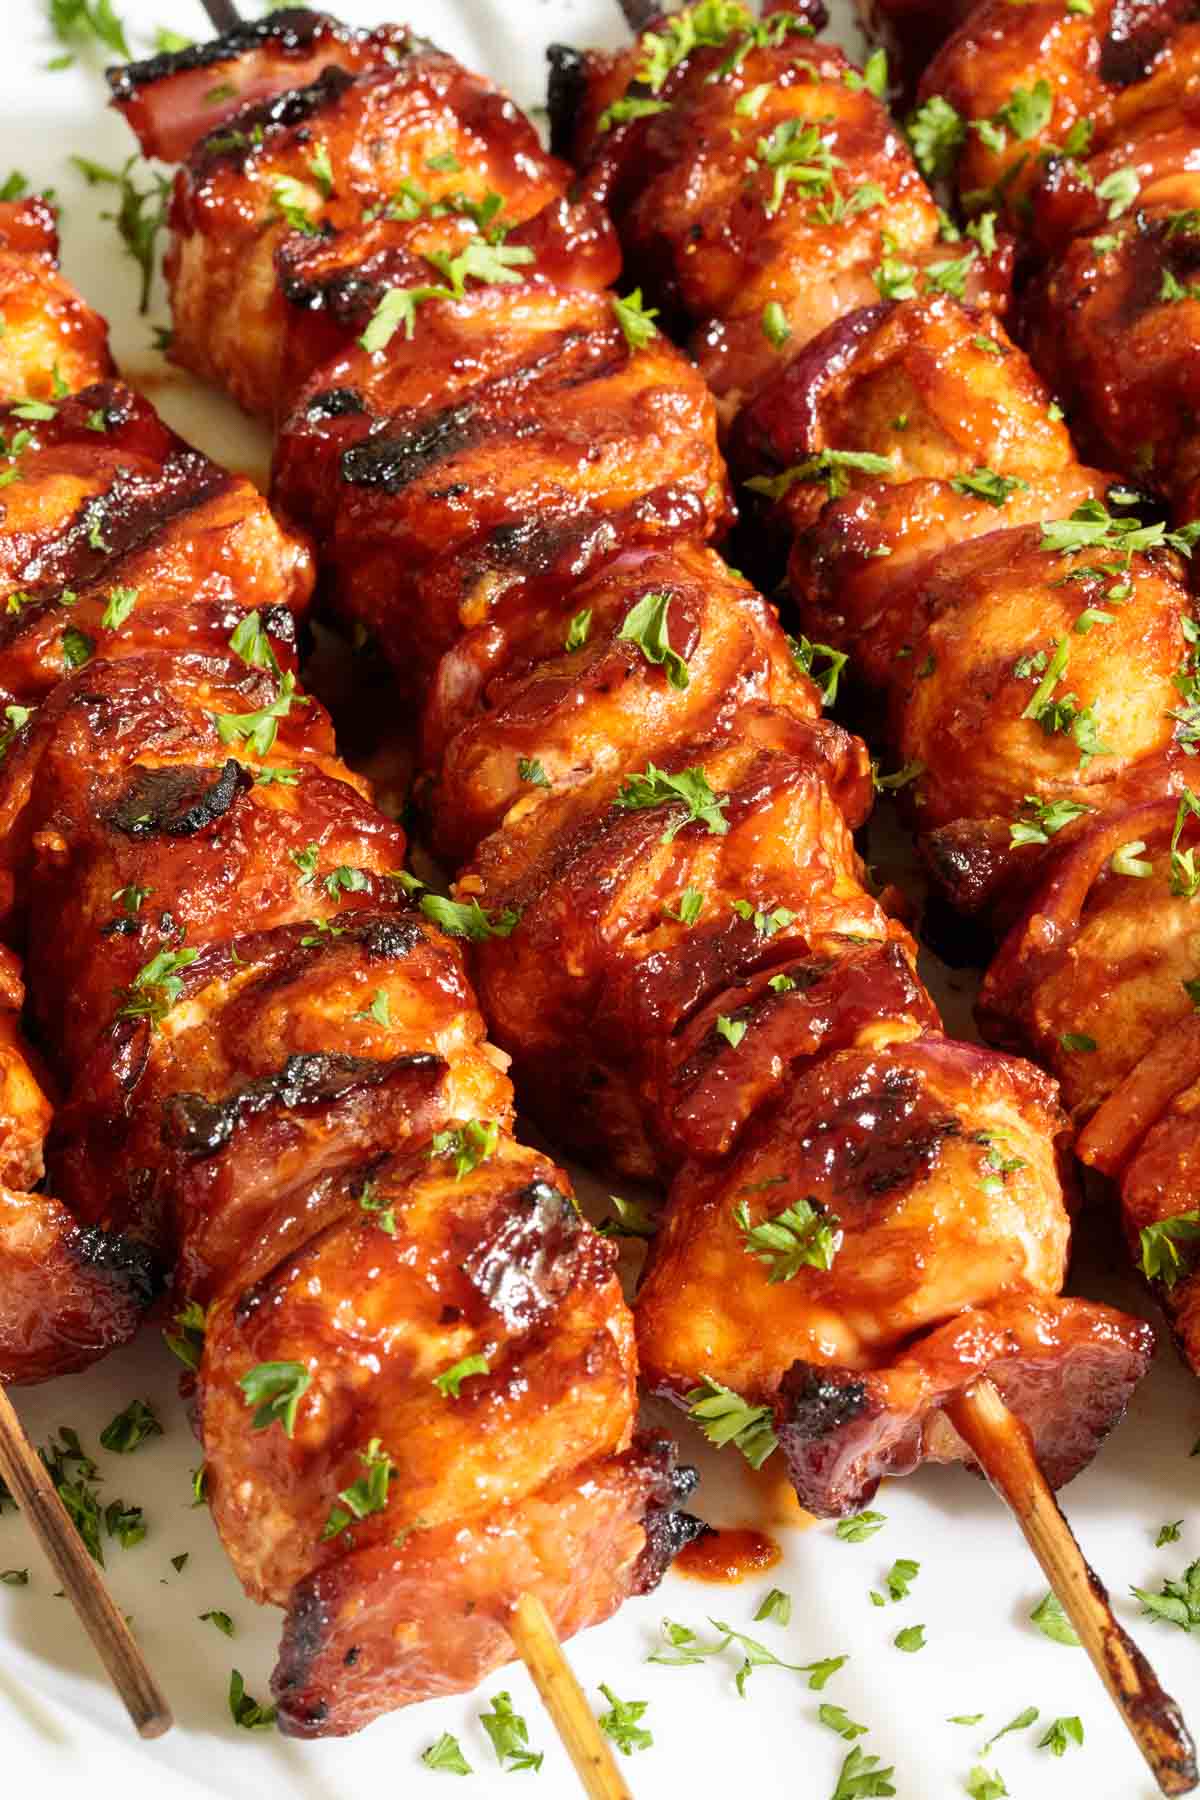 Bacon Bourbon Barbecue Chicken Skewers via The Cafe Sucre Farine. Level up your summer fun with some of the best BBQ and grilling recipes of all time! If you're looking for some easy + healthy BBQ recipes, grilled chicken or meat for a crowd, we've got you covered. Check out our over 30 summer BBQ recipes for you to try!